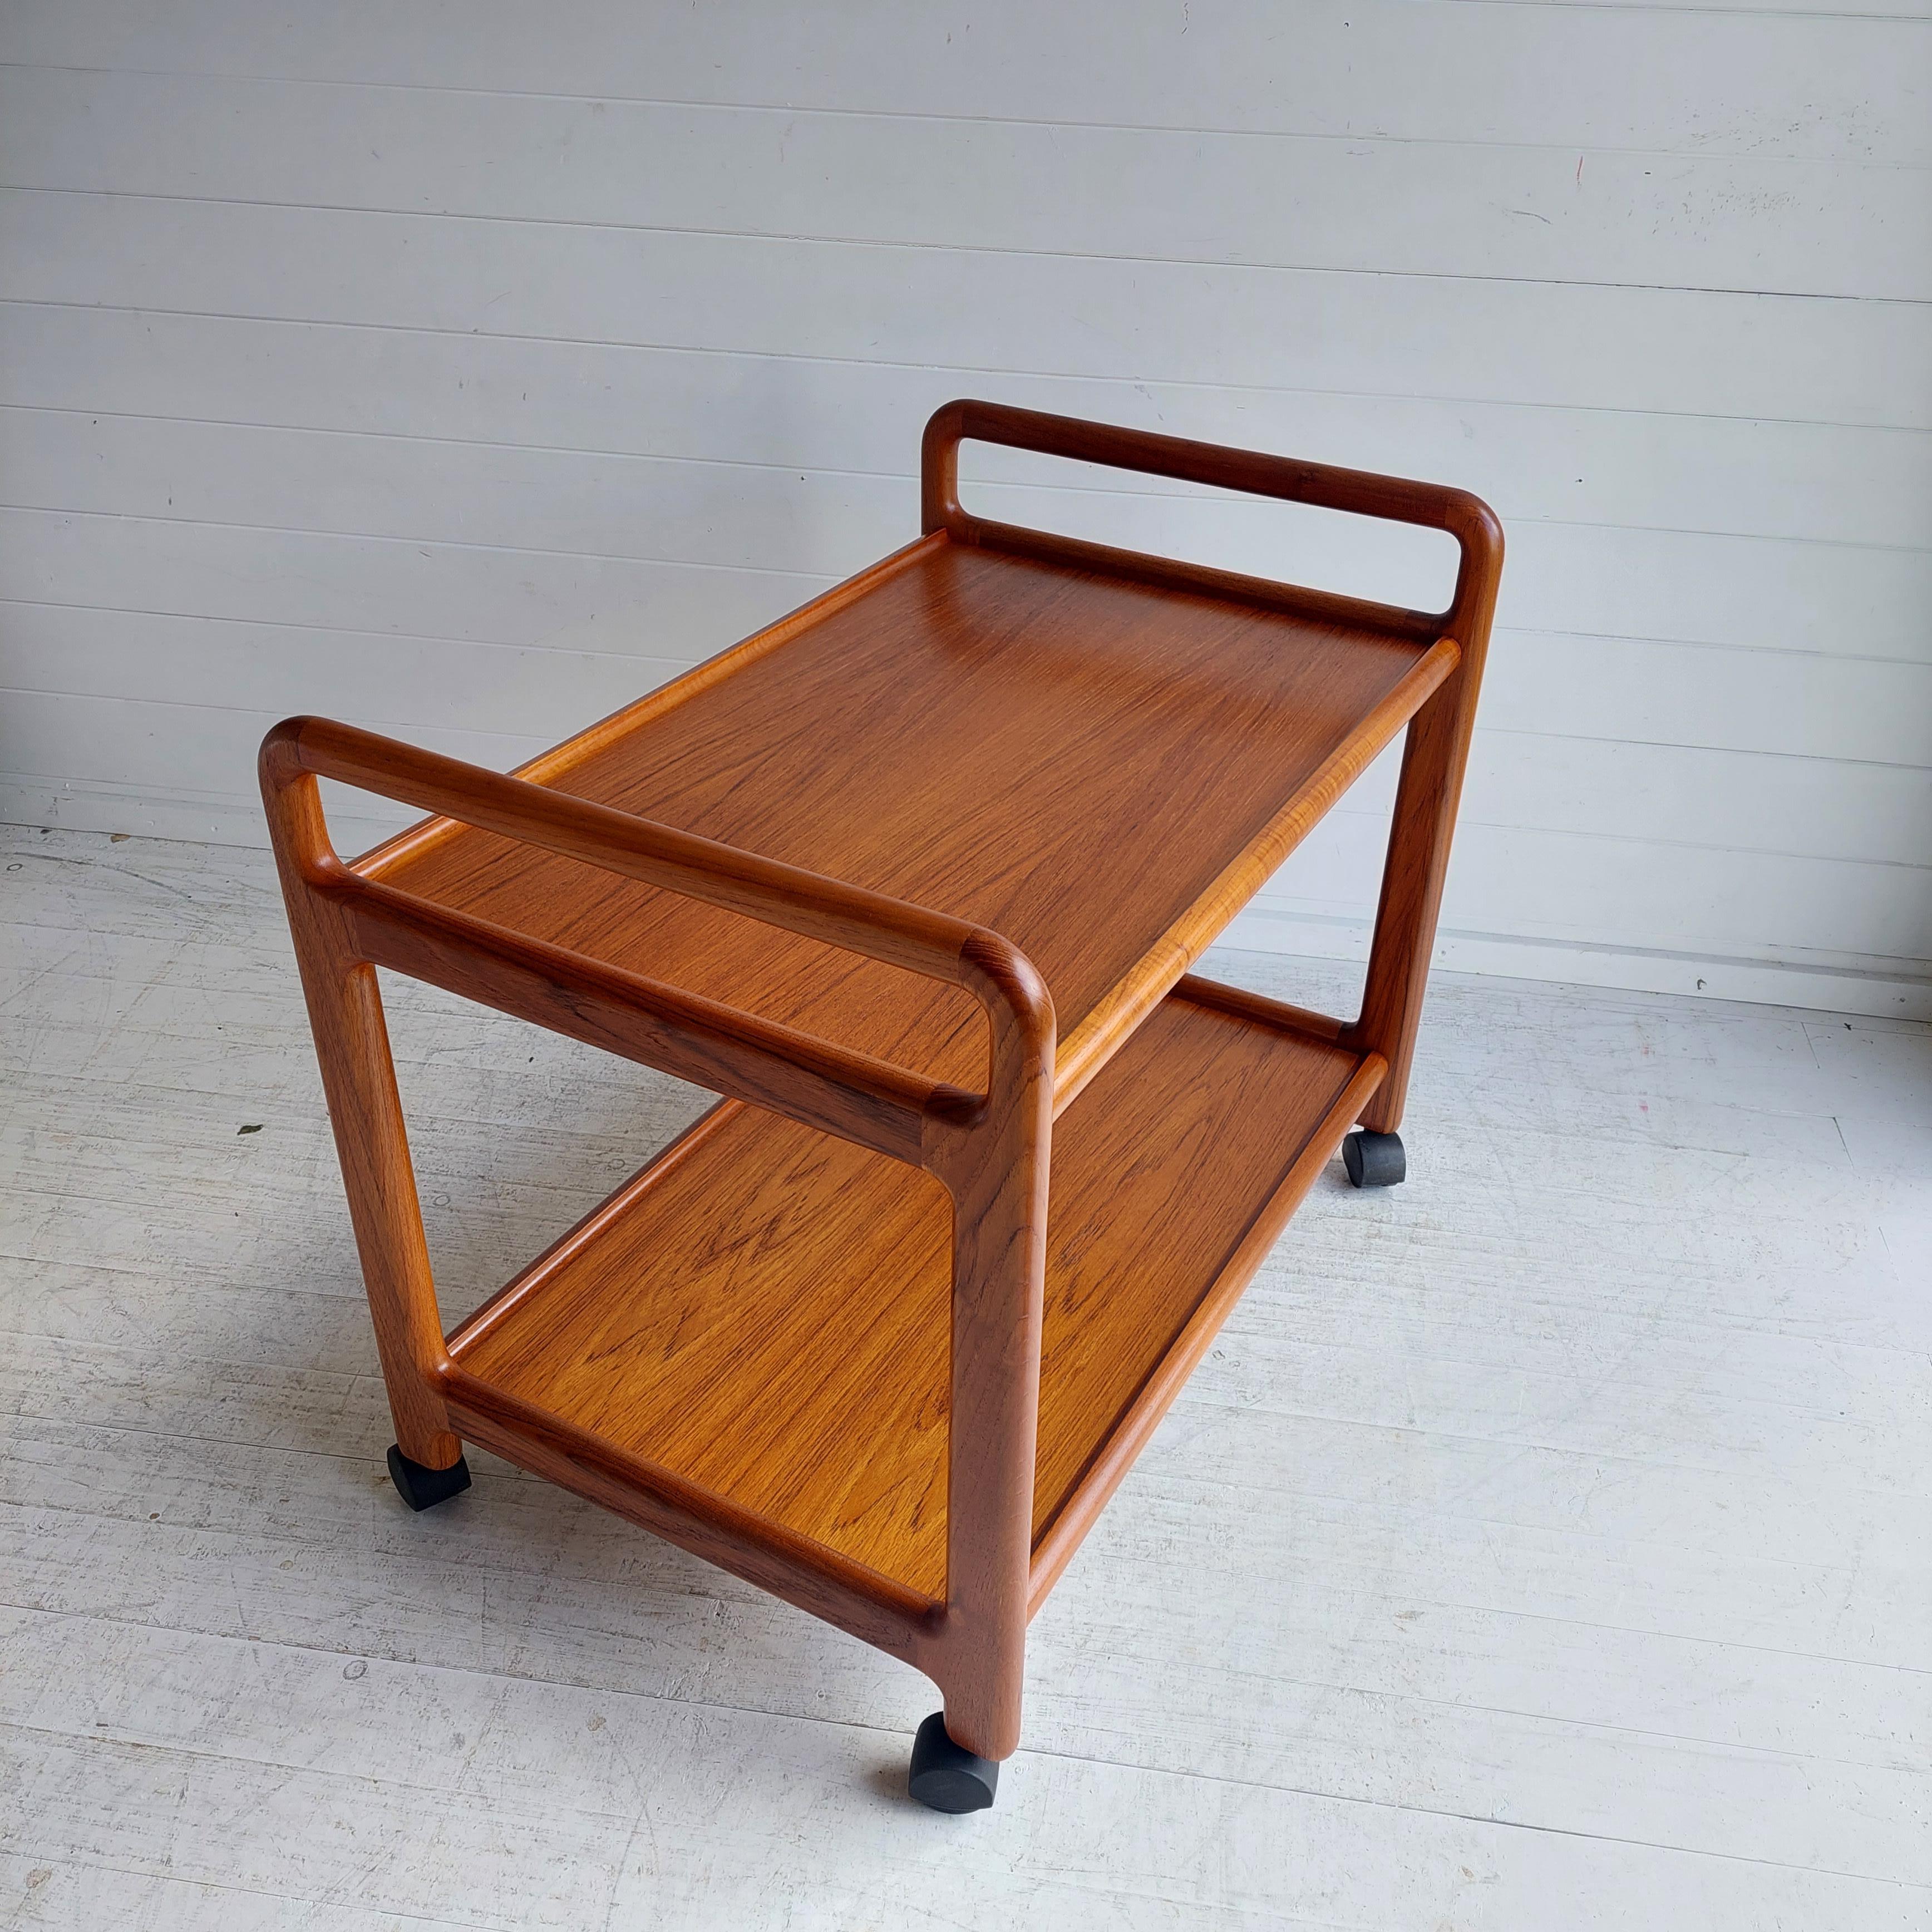 Mid Century Teak sculptural Trolley. Completely restored
Manufactured by KORUP STOLEFABRIK.
Korup Stolefabrik was founded in 1948 and active until 2002.
Designed presumably by Henry Kjaernulf
Made circa 1960 

A great example of European modernist